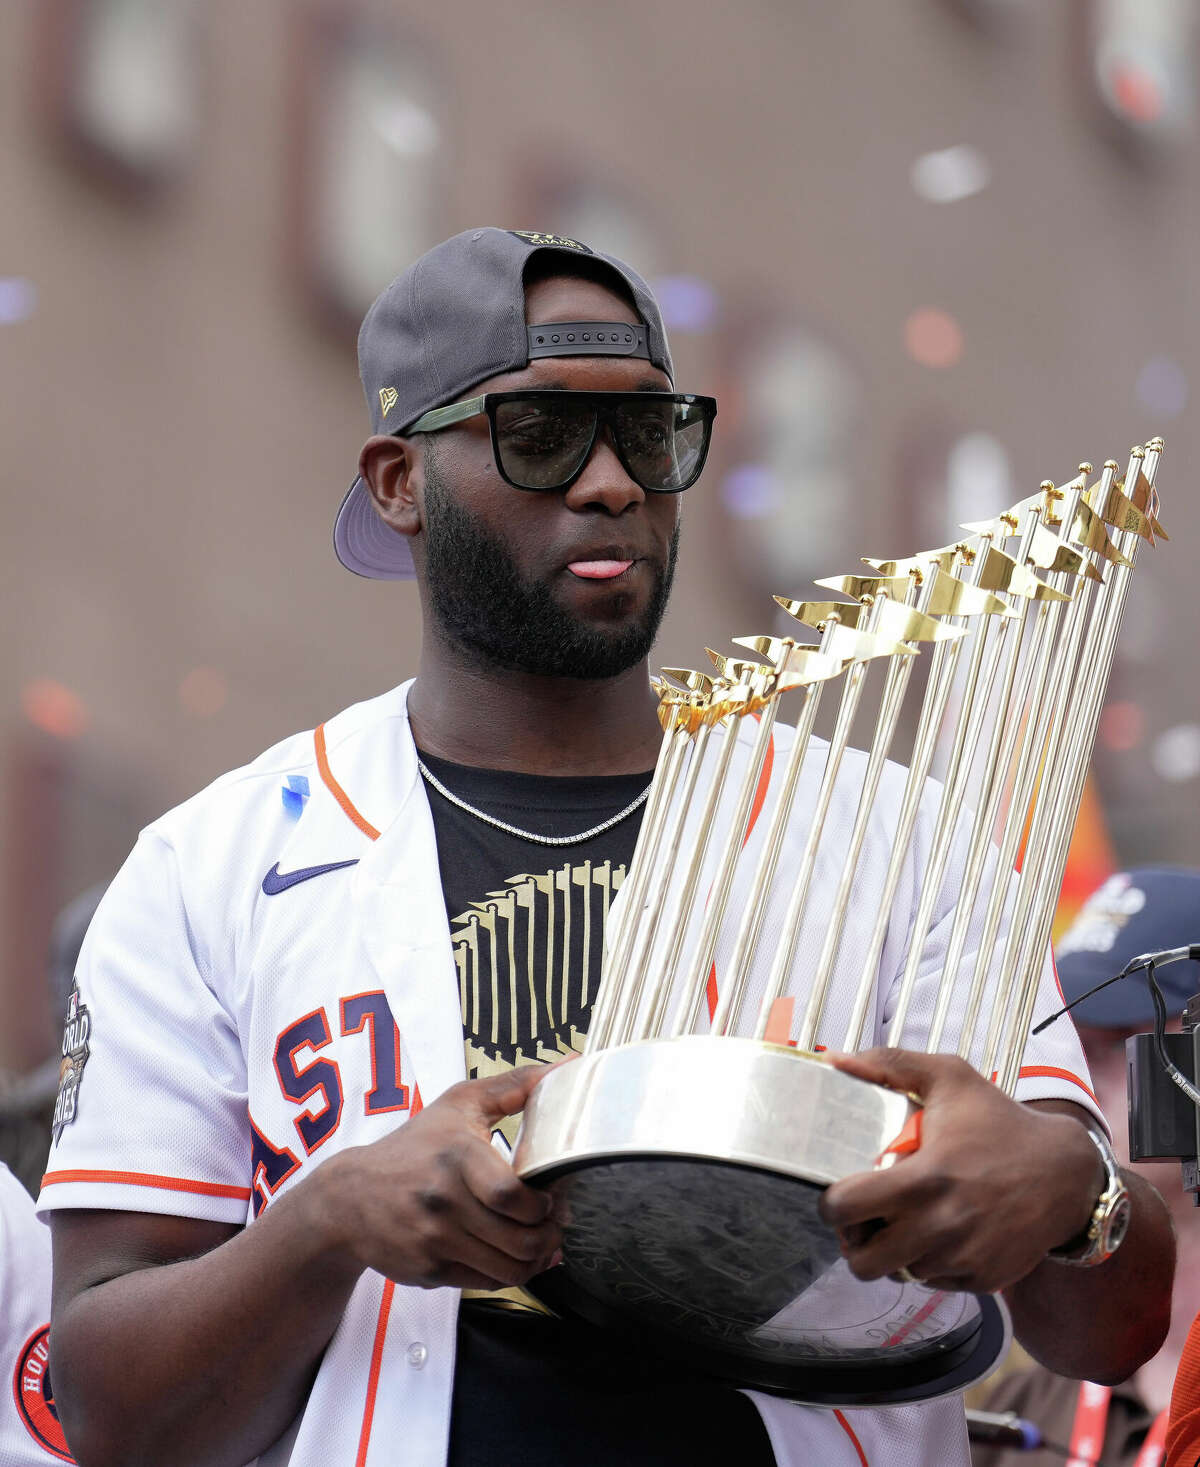 Houston Astros designated hitter Yordan Alvarez holds the 2017 World Series trophy in the 2022 World Series Championship Parade. He's scheduled to meet fans tonight at Dick's Sporting Goods in Friendswood.